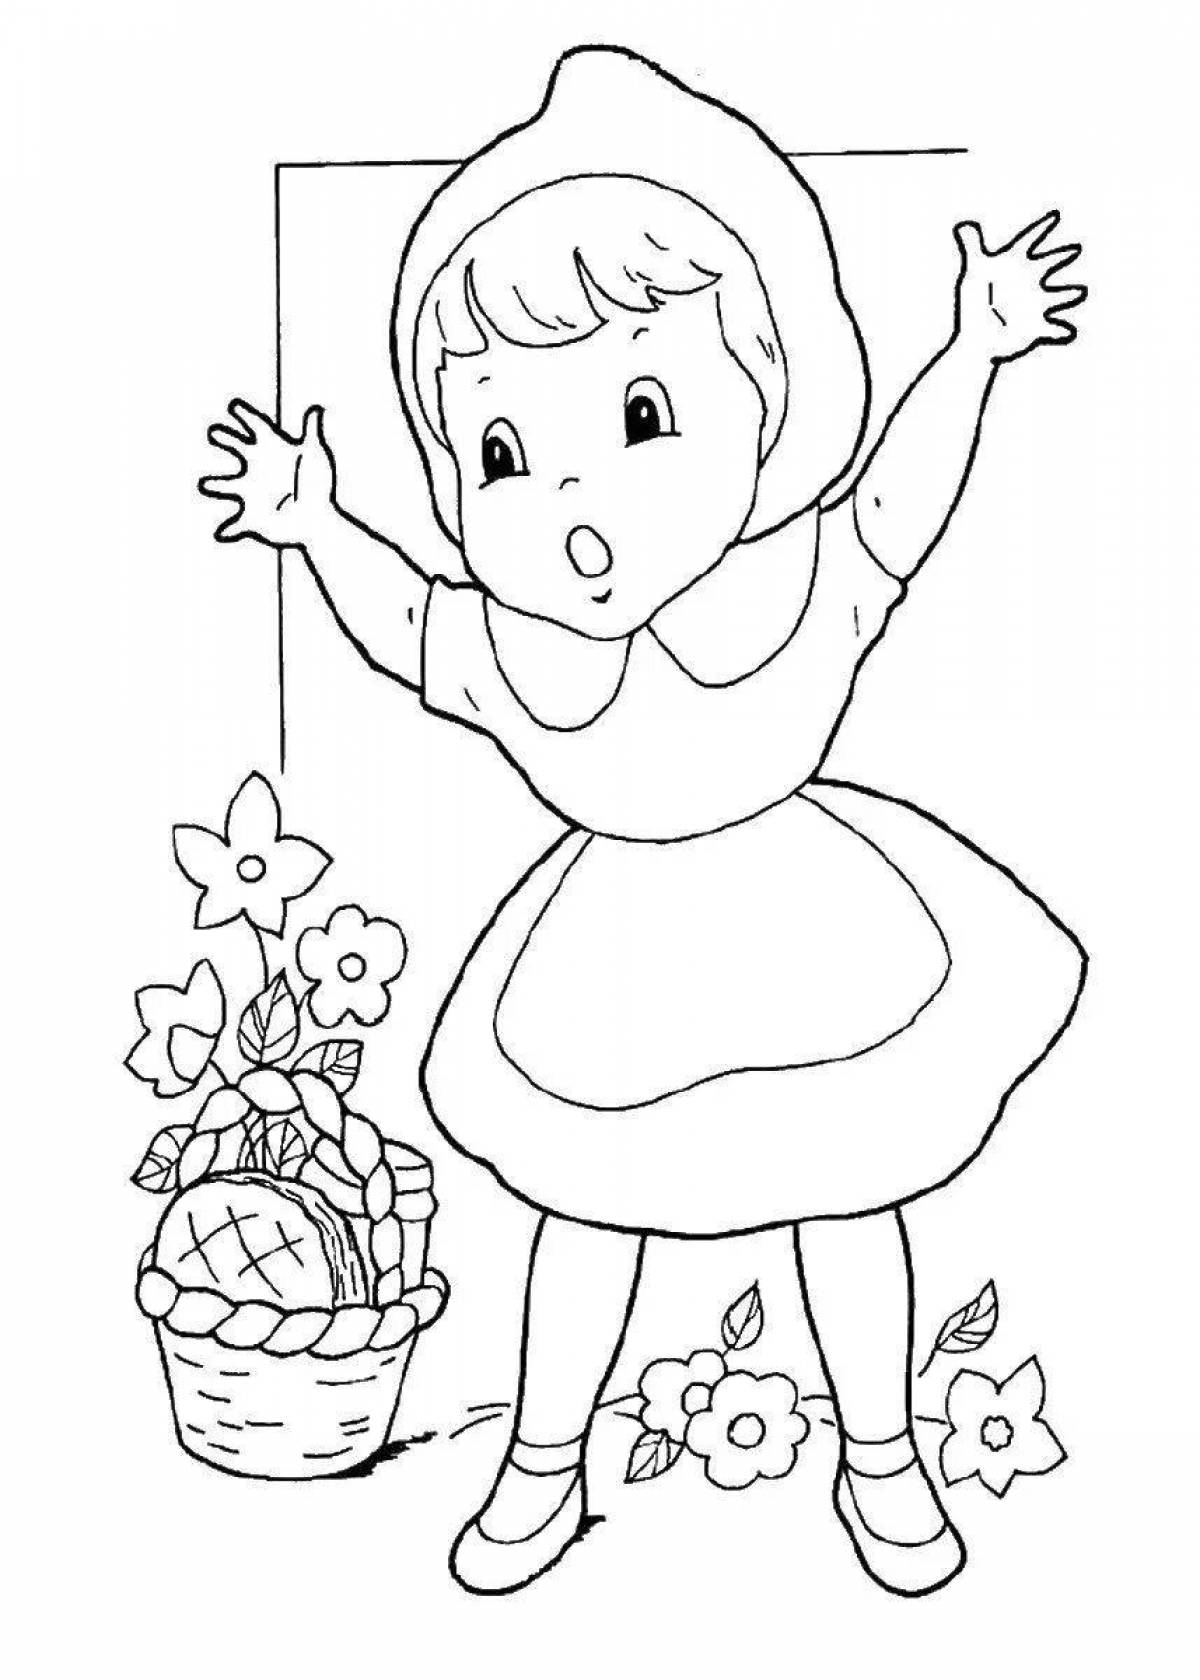 An animated granddaughter coloring page